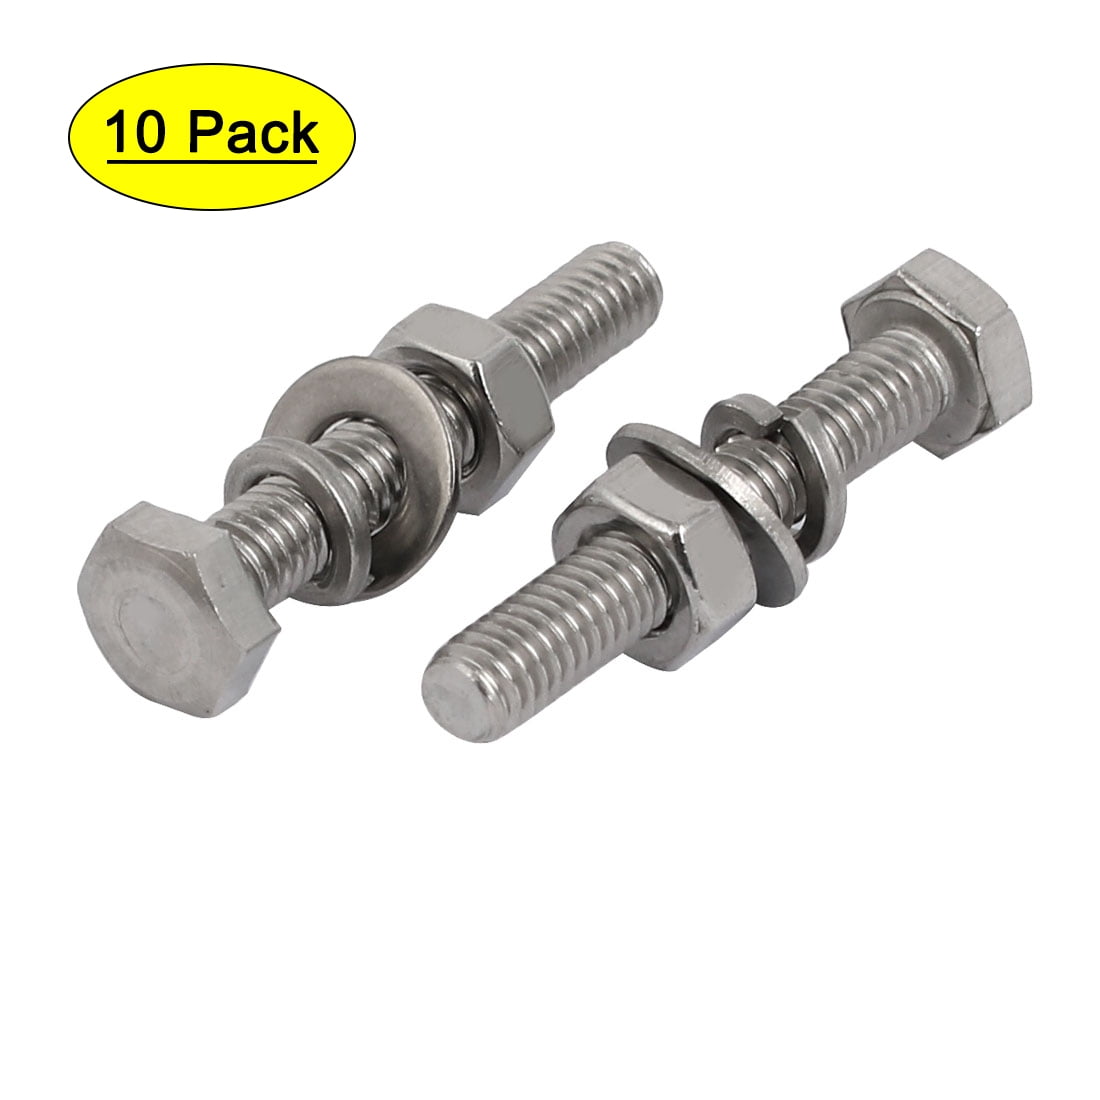 10 Set 304 Stainless Steel #10-24 Thread 3/4" Length Hex Bolt Kit w Washer Nut 